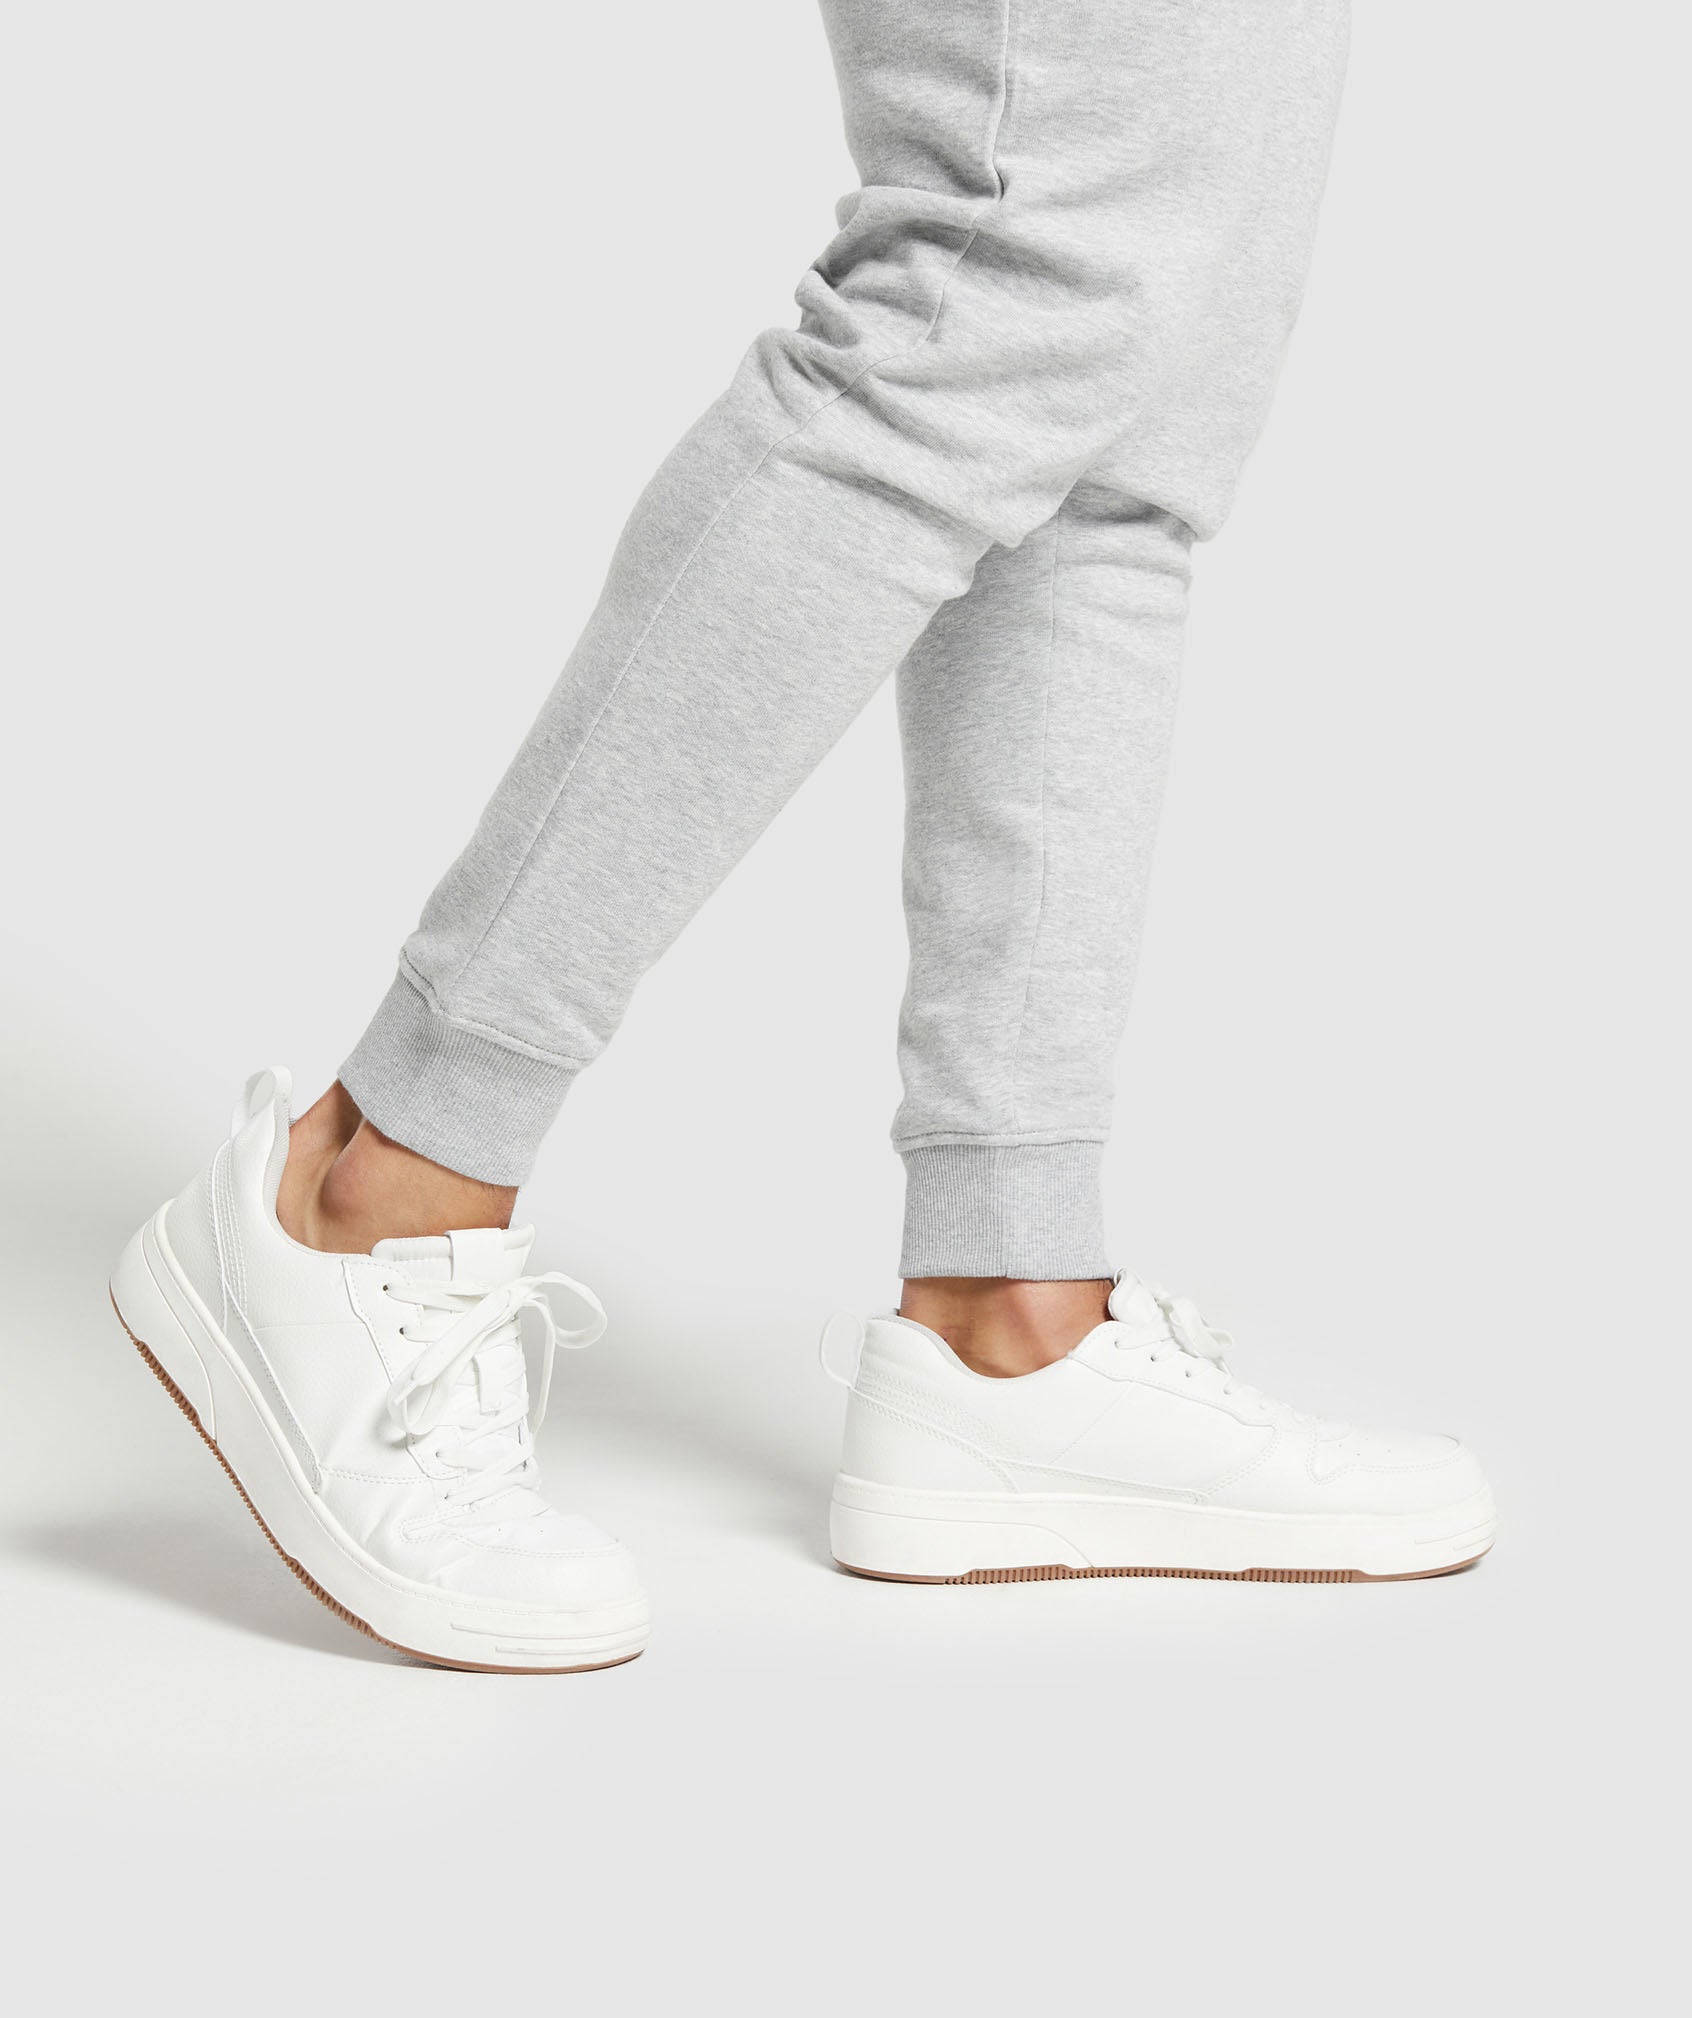 Crest Joggers in Light Grey Marl